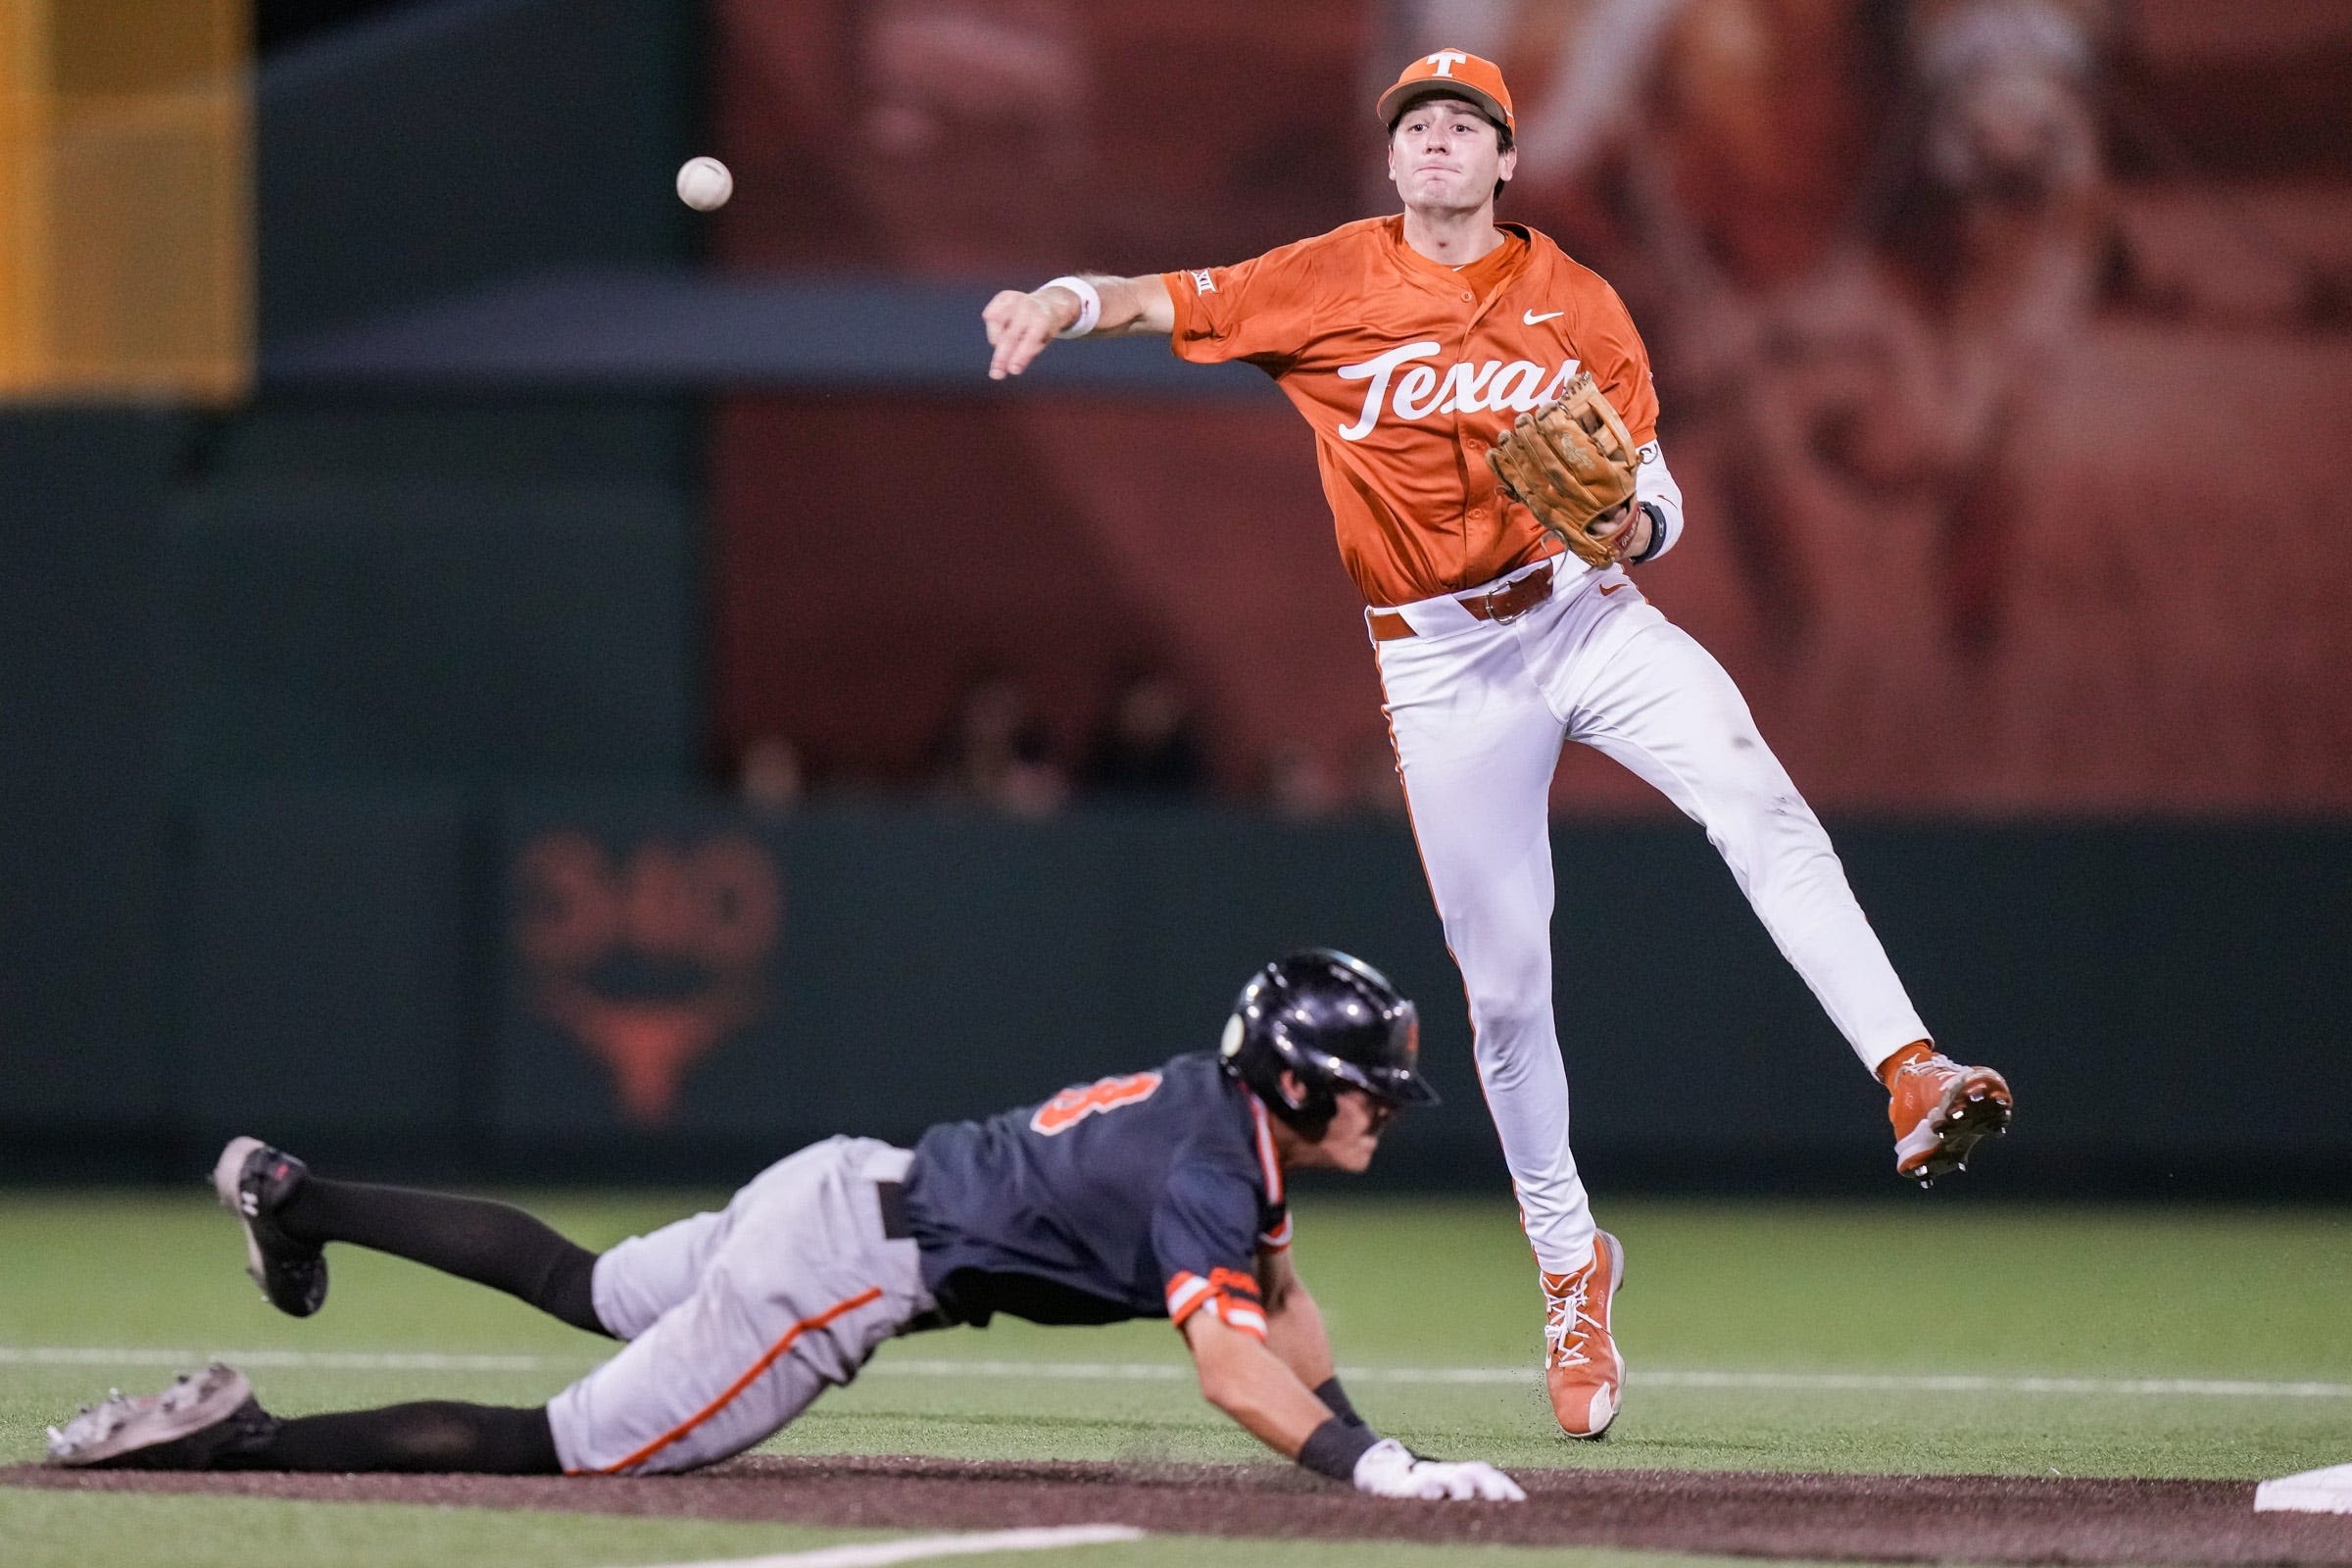 Shortstop Jalin Flores returns to Texas baseball team for 'One more year at the Disch'